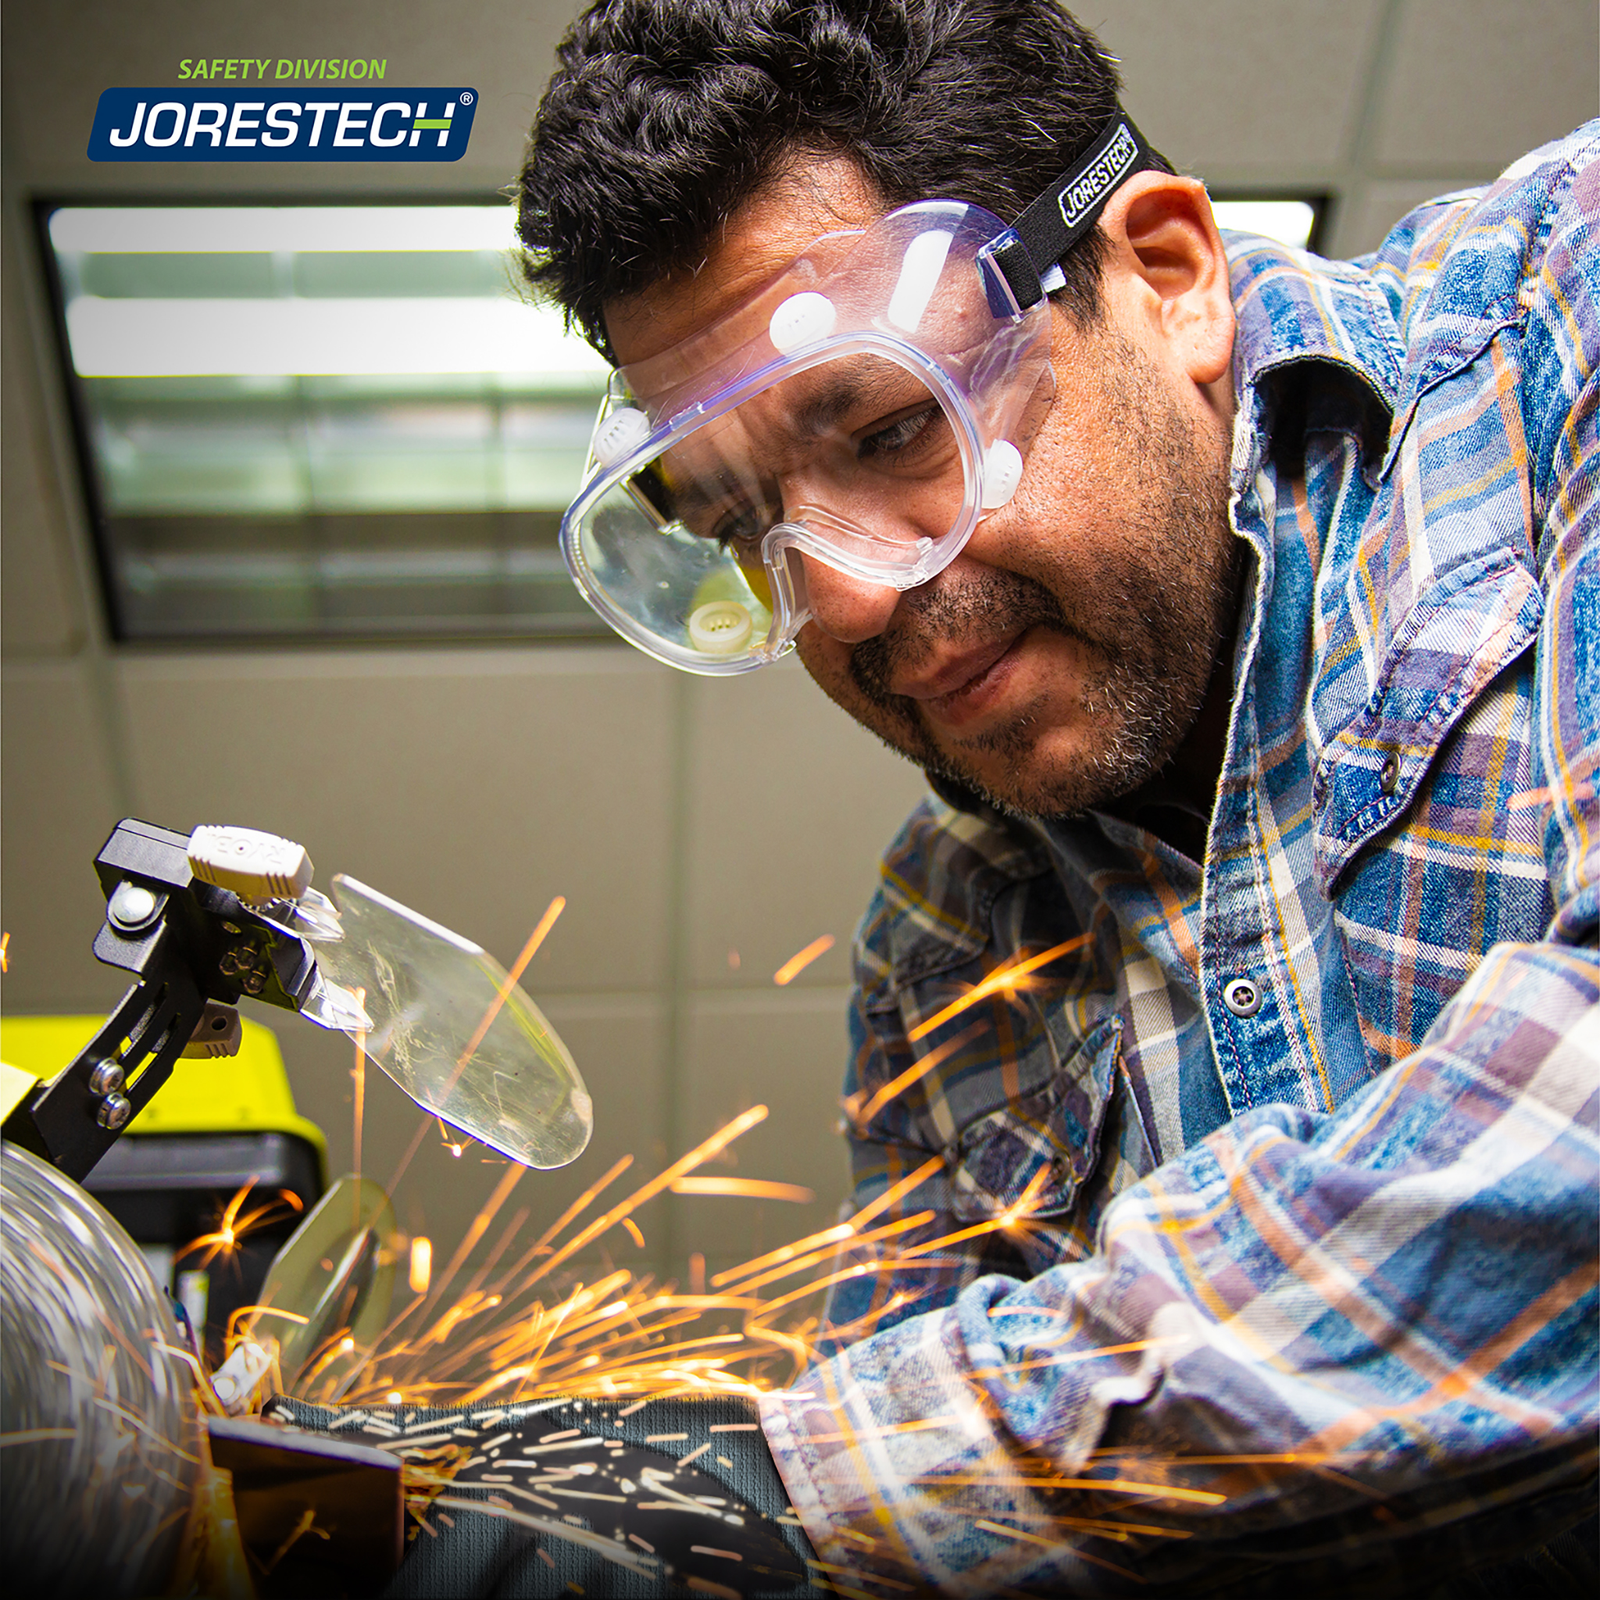  Man wearing JORESTECH safety goggle while operating a power tool machine